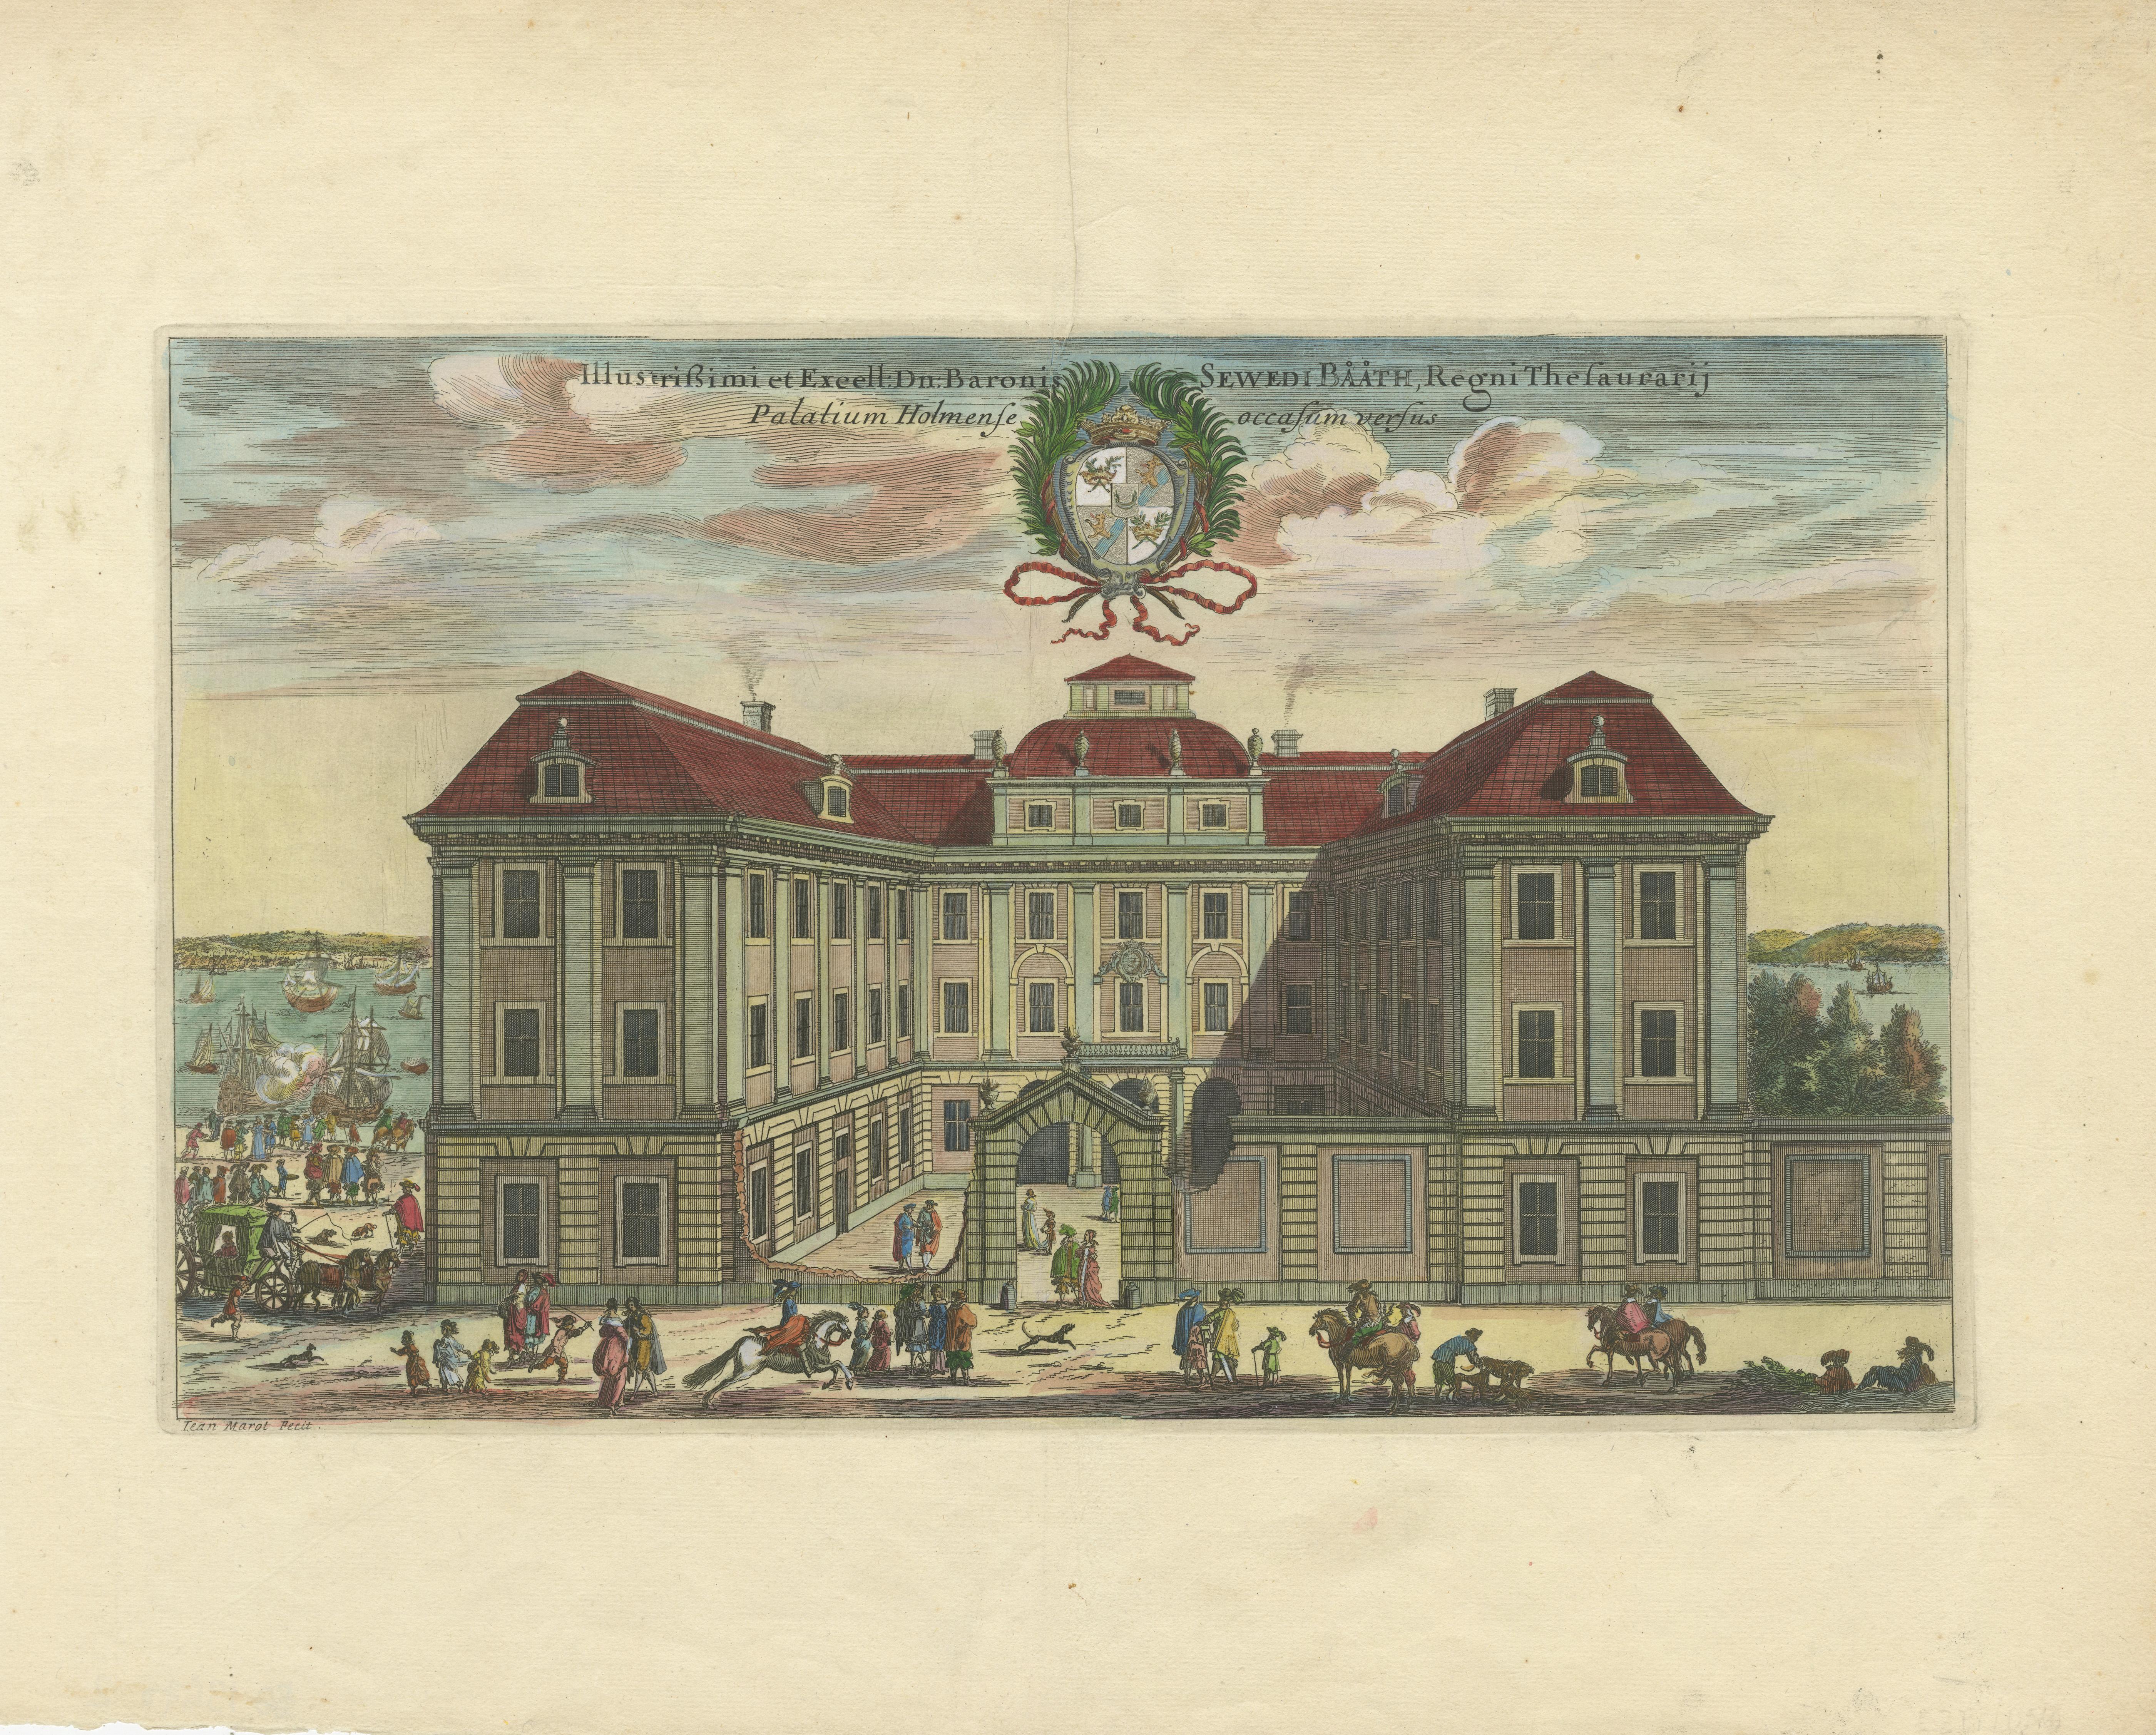 This original antique print depicts an antique hand-colored engraving of the Bååtska Palatset in Stockholm, Sweden, illustrated by Erik Dahlbergh. 

The Bååtska Palatset is a notable building in Stockholm's history, and this particular print is from